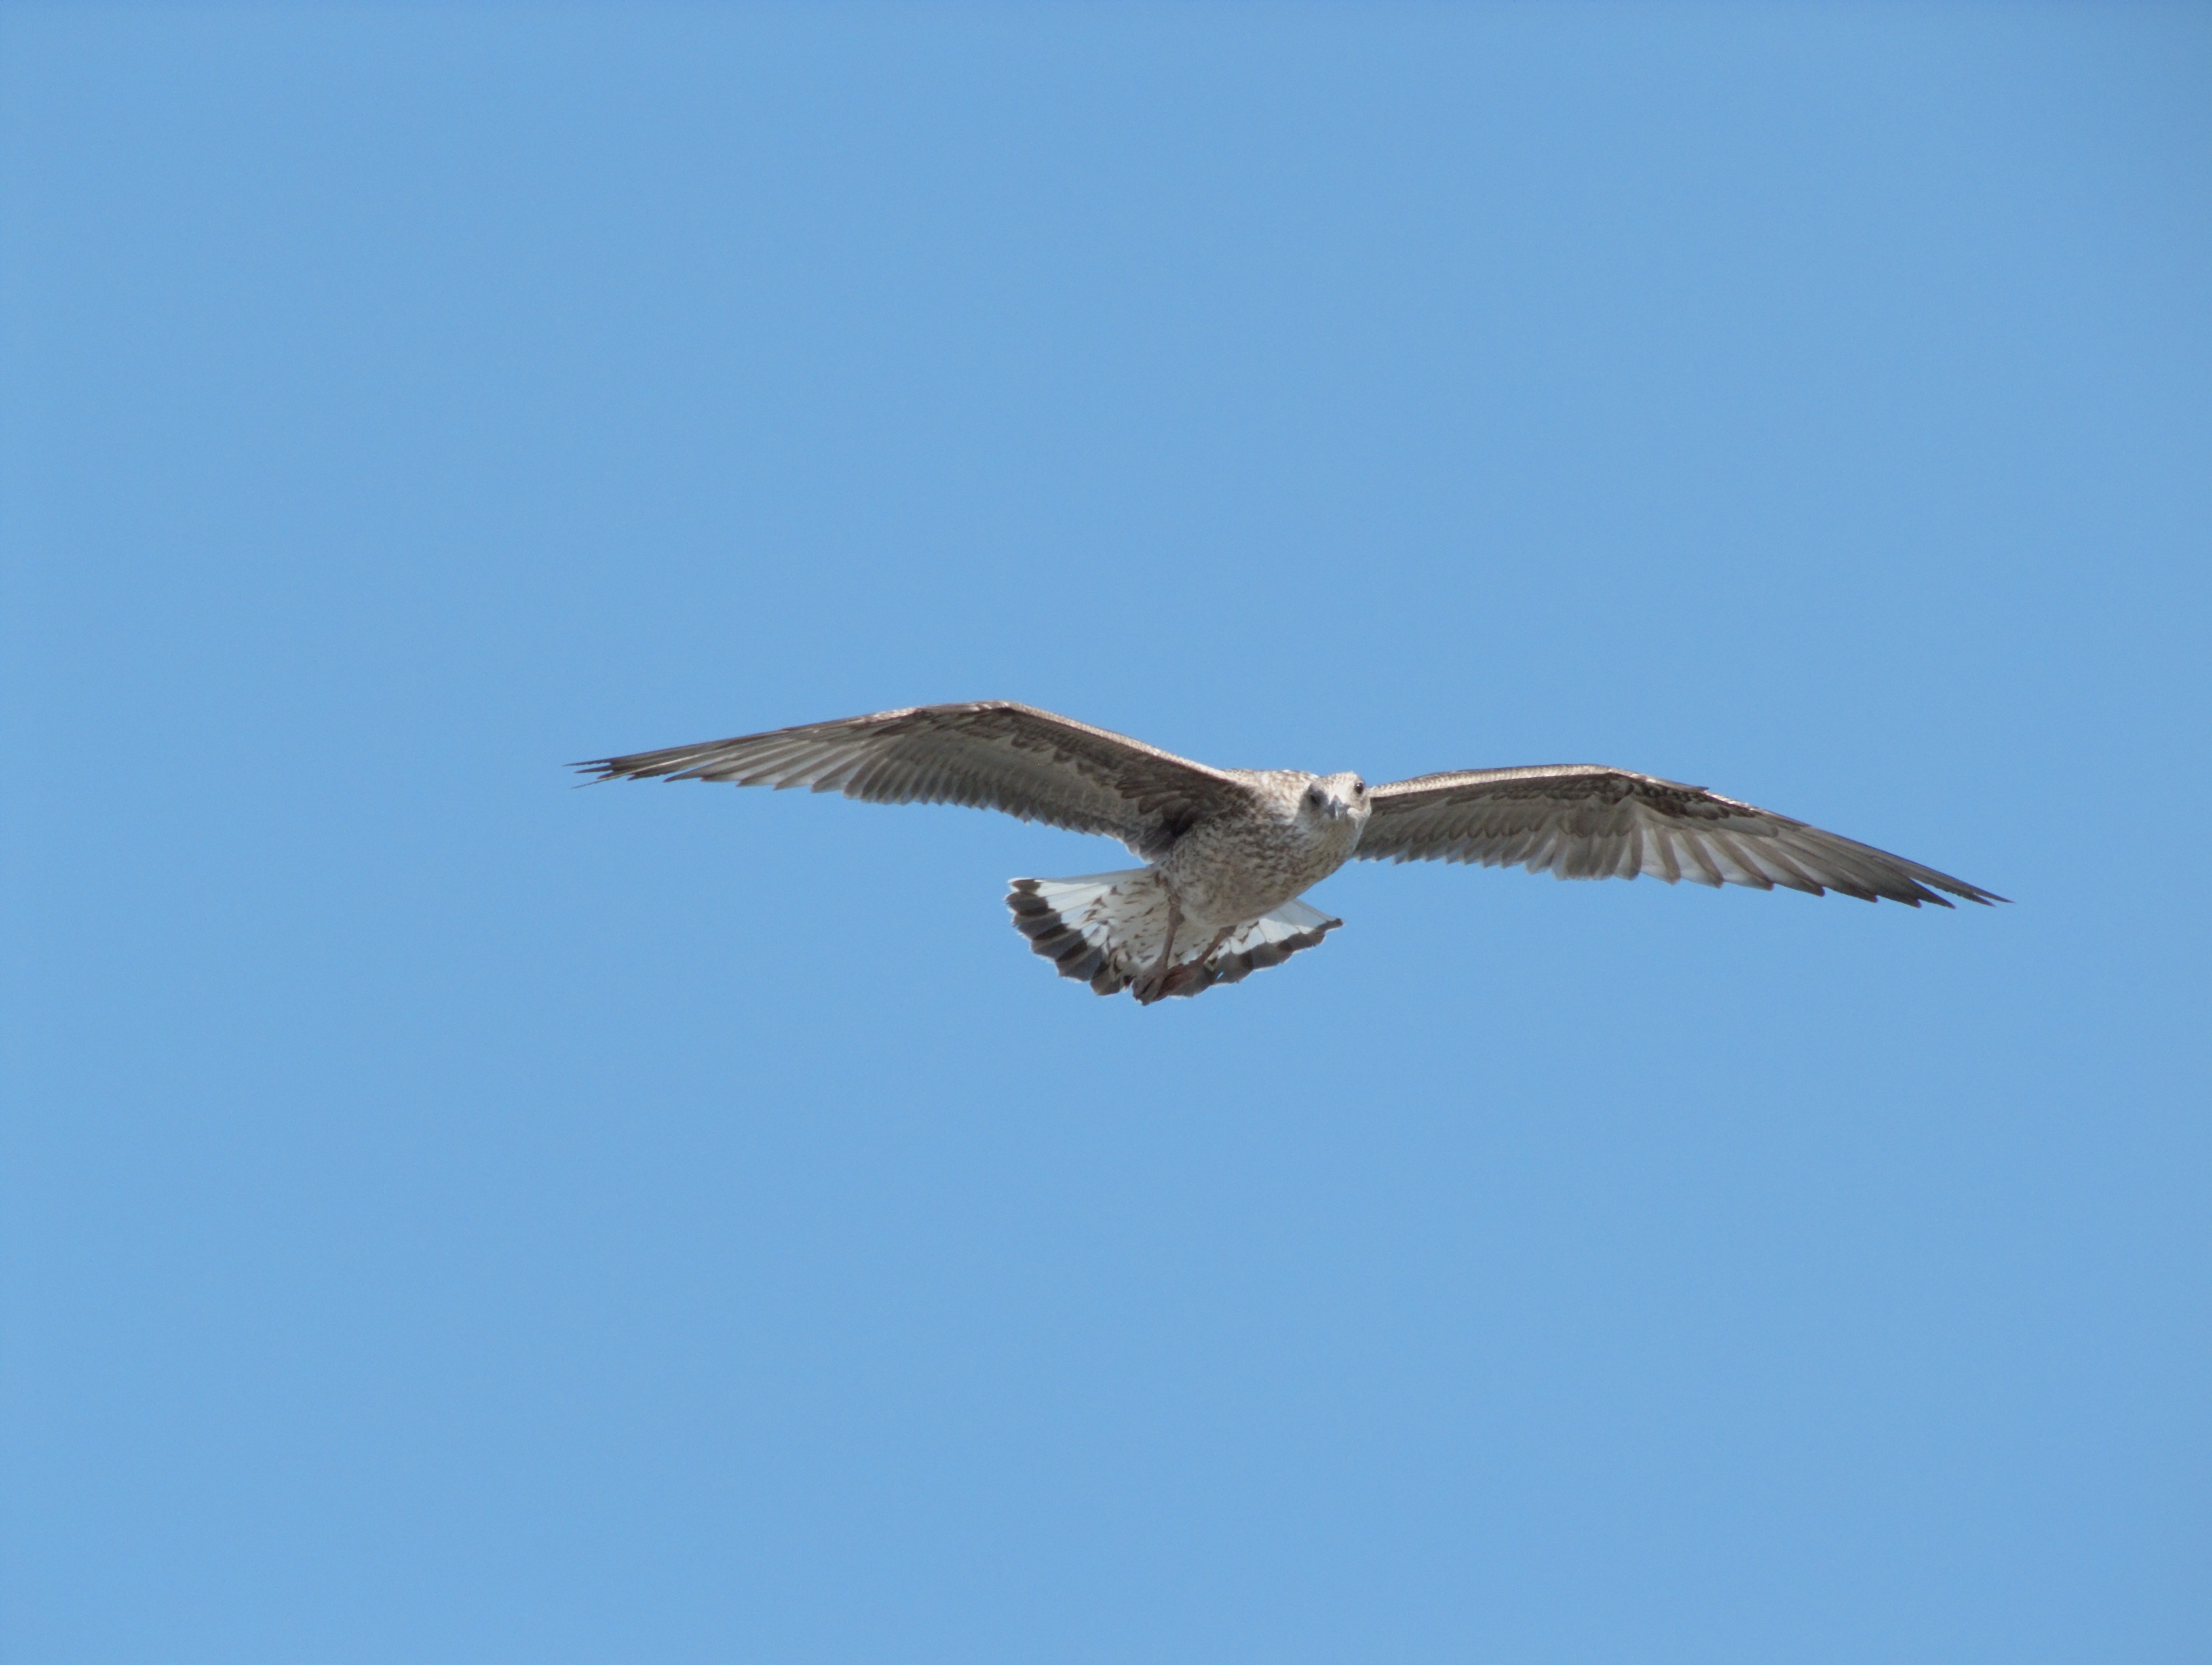 Cattolica (Rimini, Italy): Young flying seagull - Cattolica (Rimini, Italy)